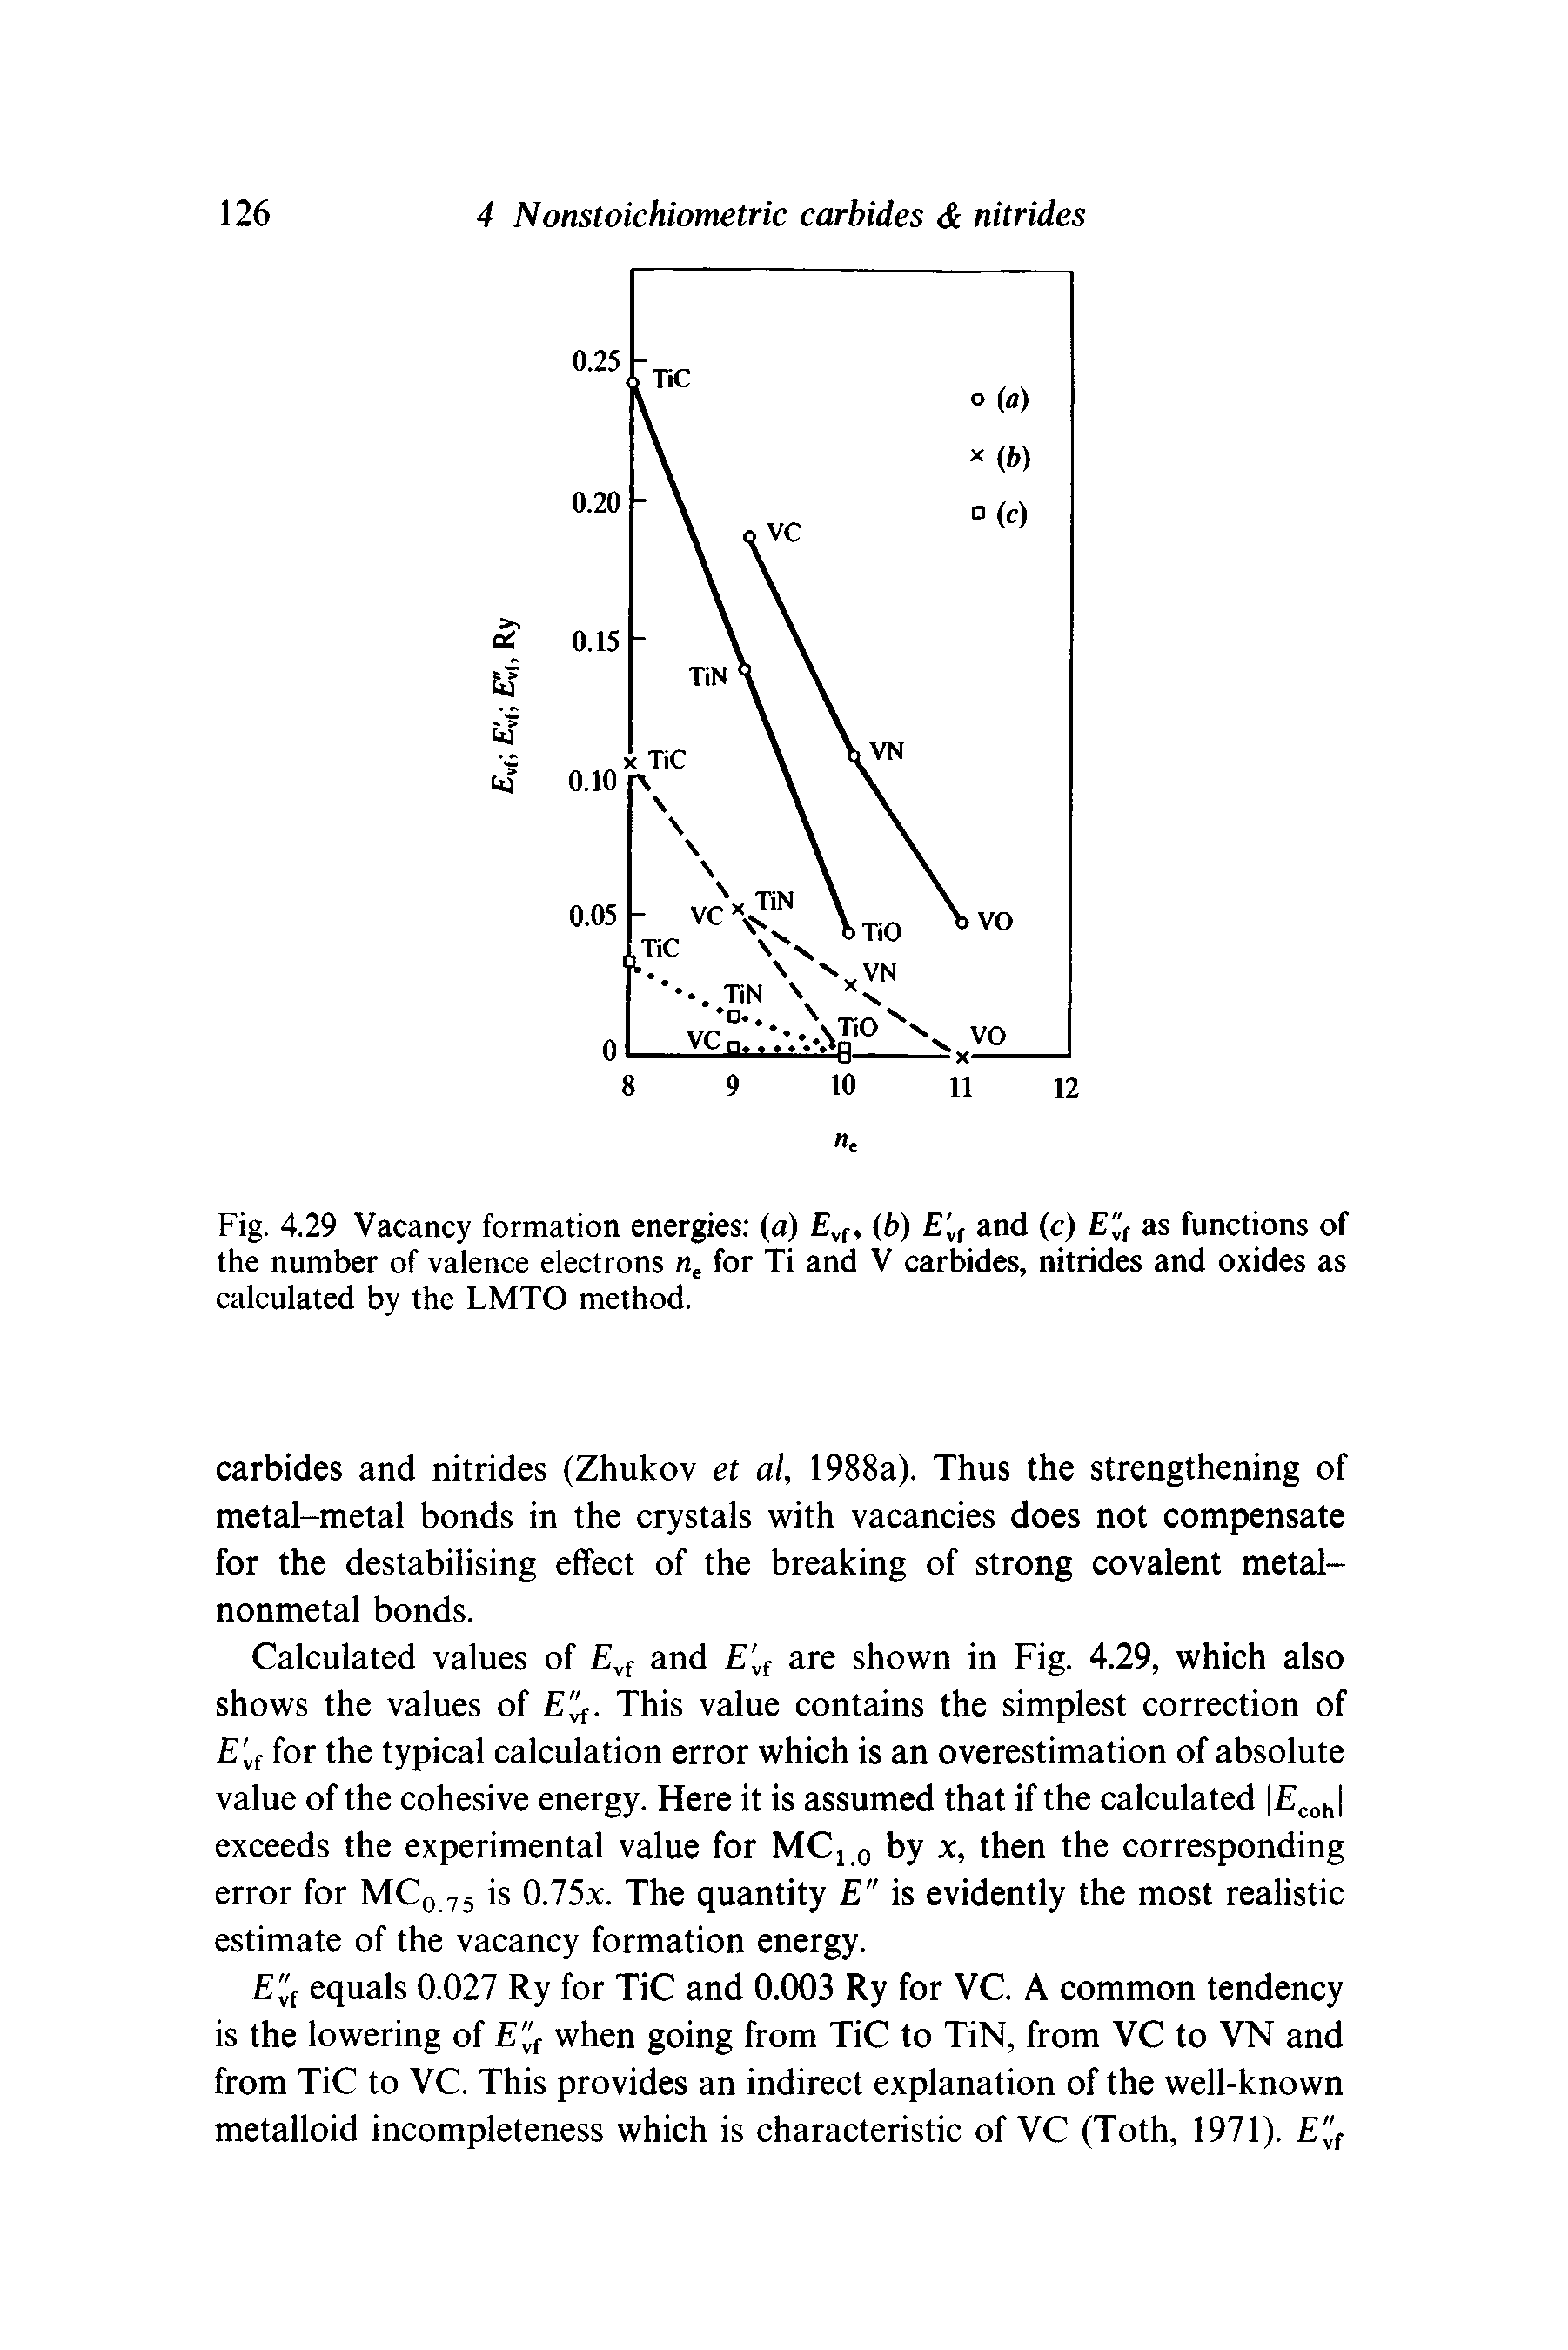 Fig. 4.29 Vacancy formation energies (a) ,f, (b) Ey, and (c) E as functions of the number of valence electrons n, for Ti and V carbides, nitrides and oxides as calculated by the LMTO method.